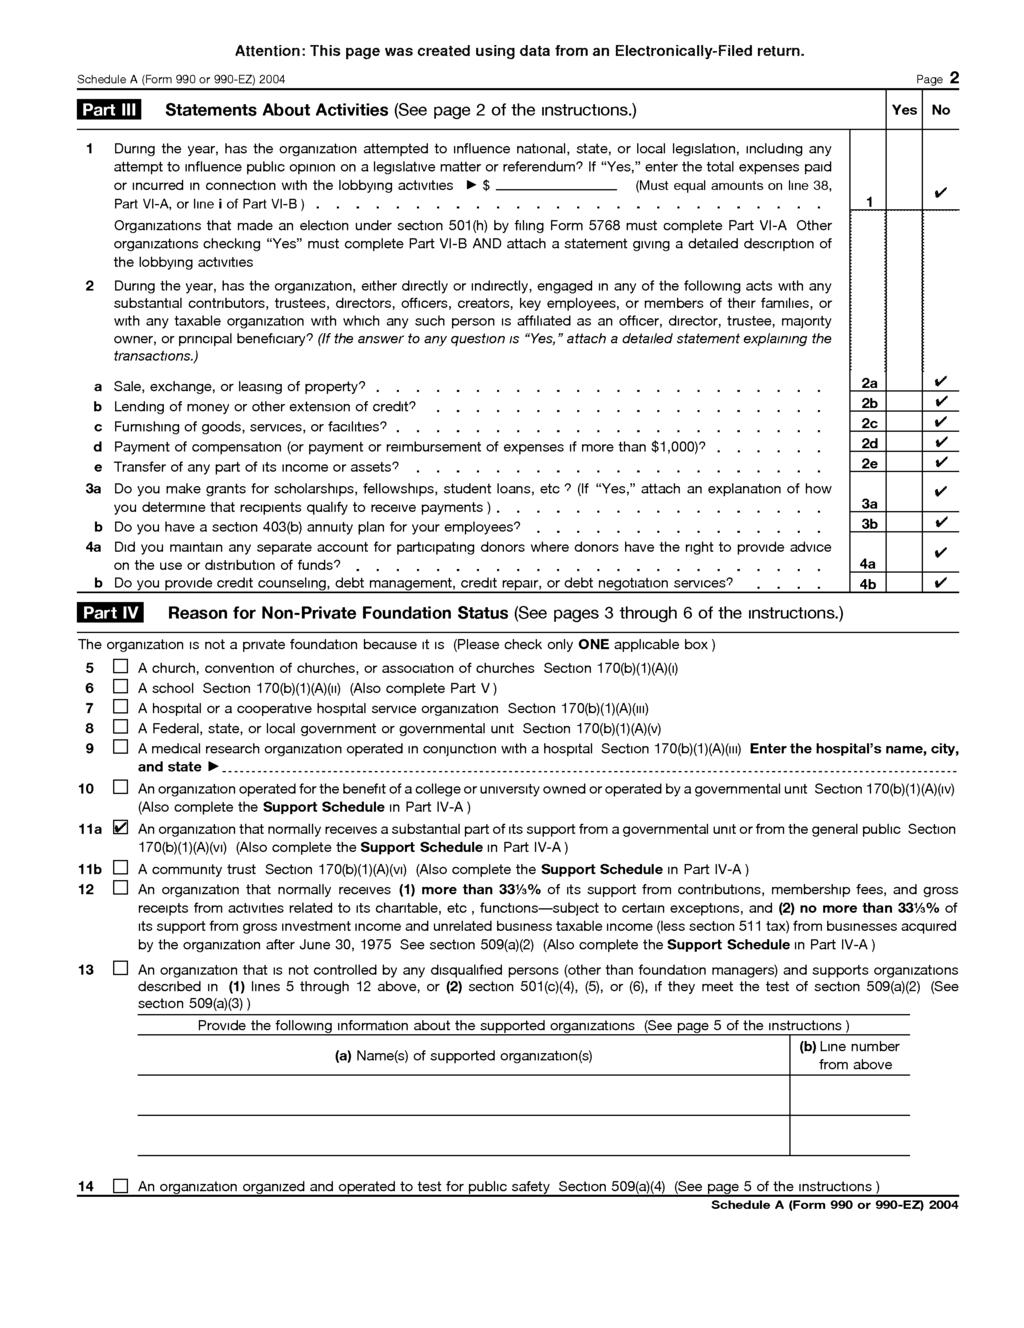 Schedule A (Form 990 or 990-EZ) 2004 Page 2 Statements About Activities (See page 2 of the instructions.